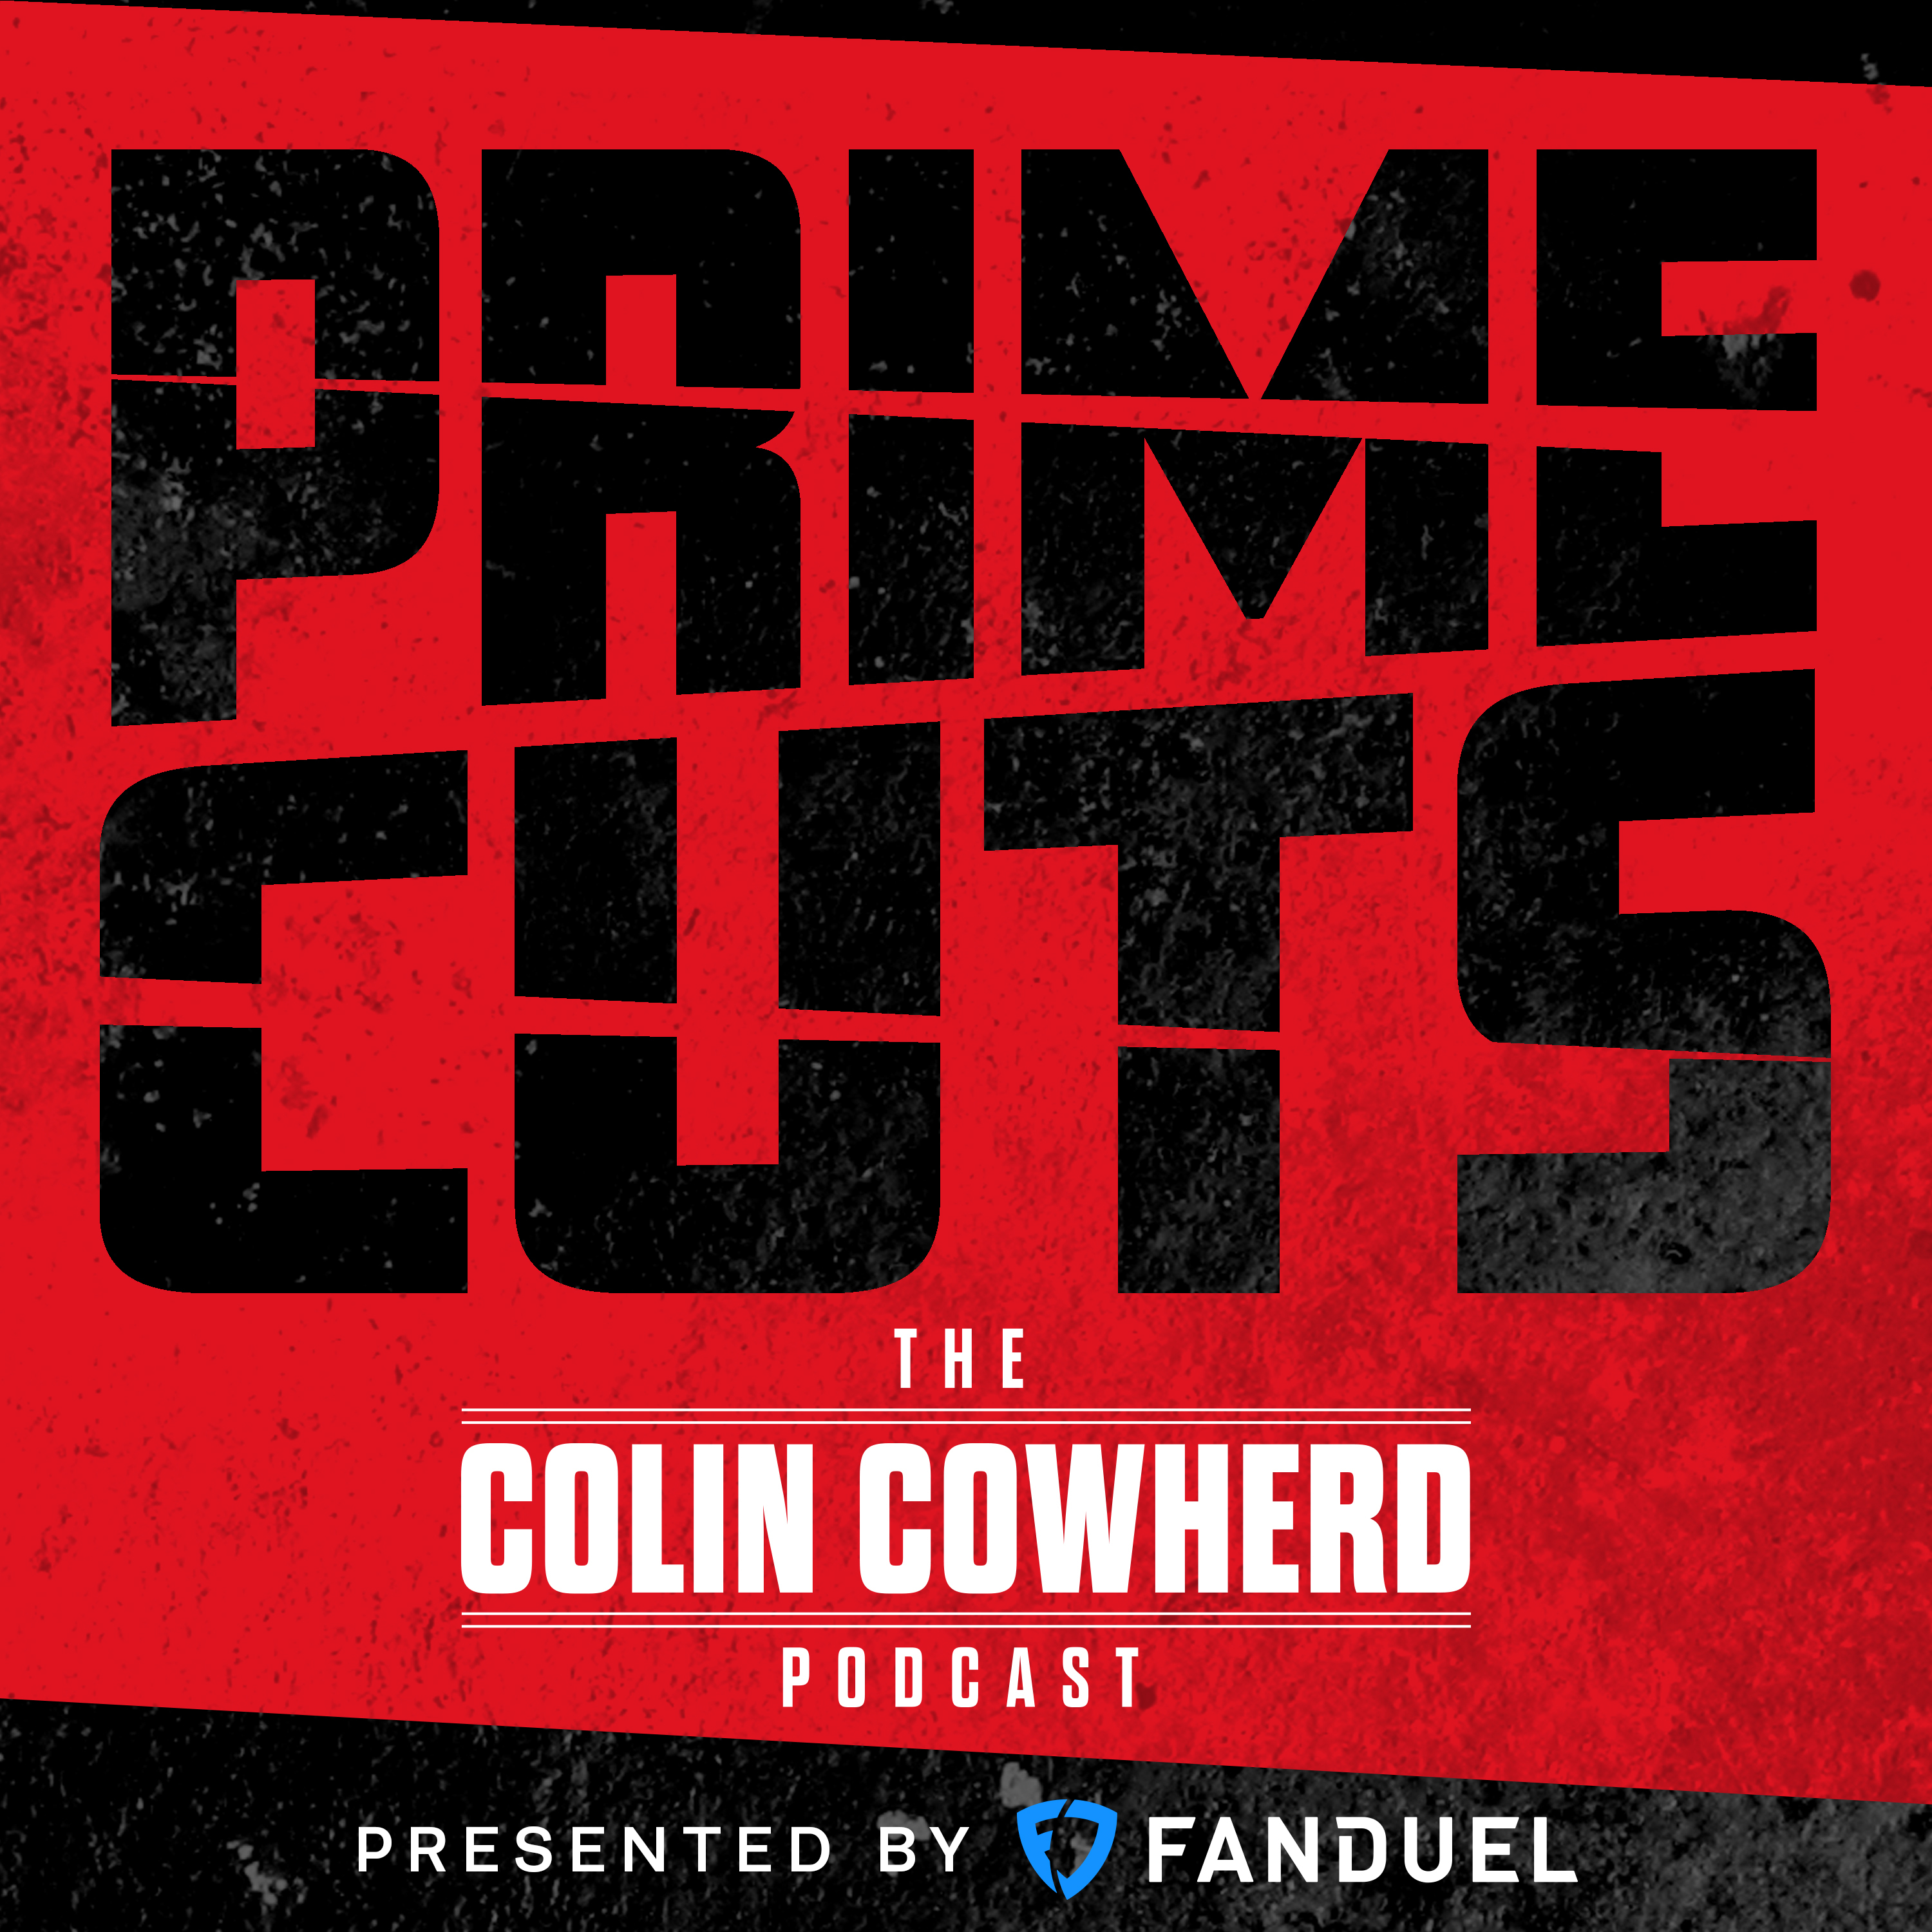 Colin Cowherd Podcast Prime Cuts -  Mike Silver on Brady to Niners Theory, Middlekauff on Bears/Panthers Trade, Draft QB’s, Marcus Thompson on Wiggins Absence